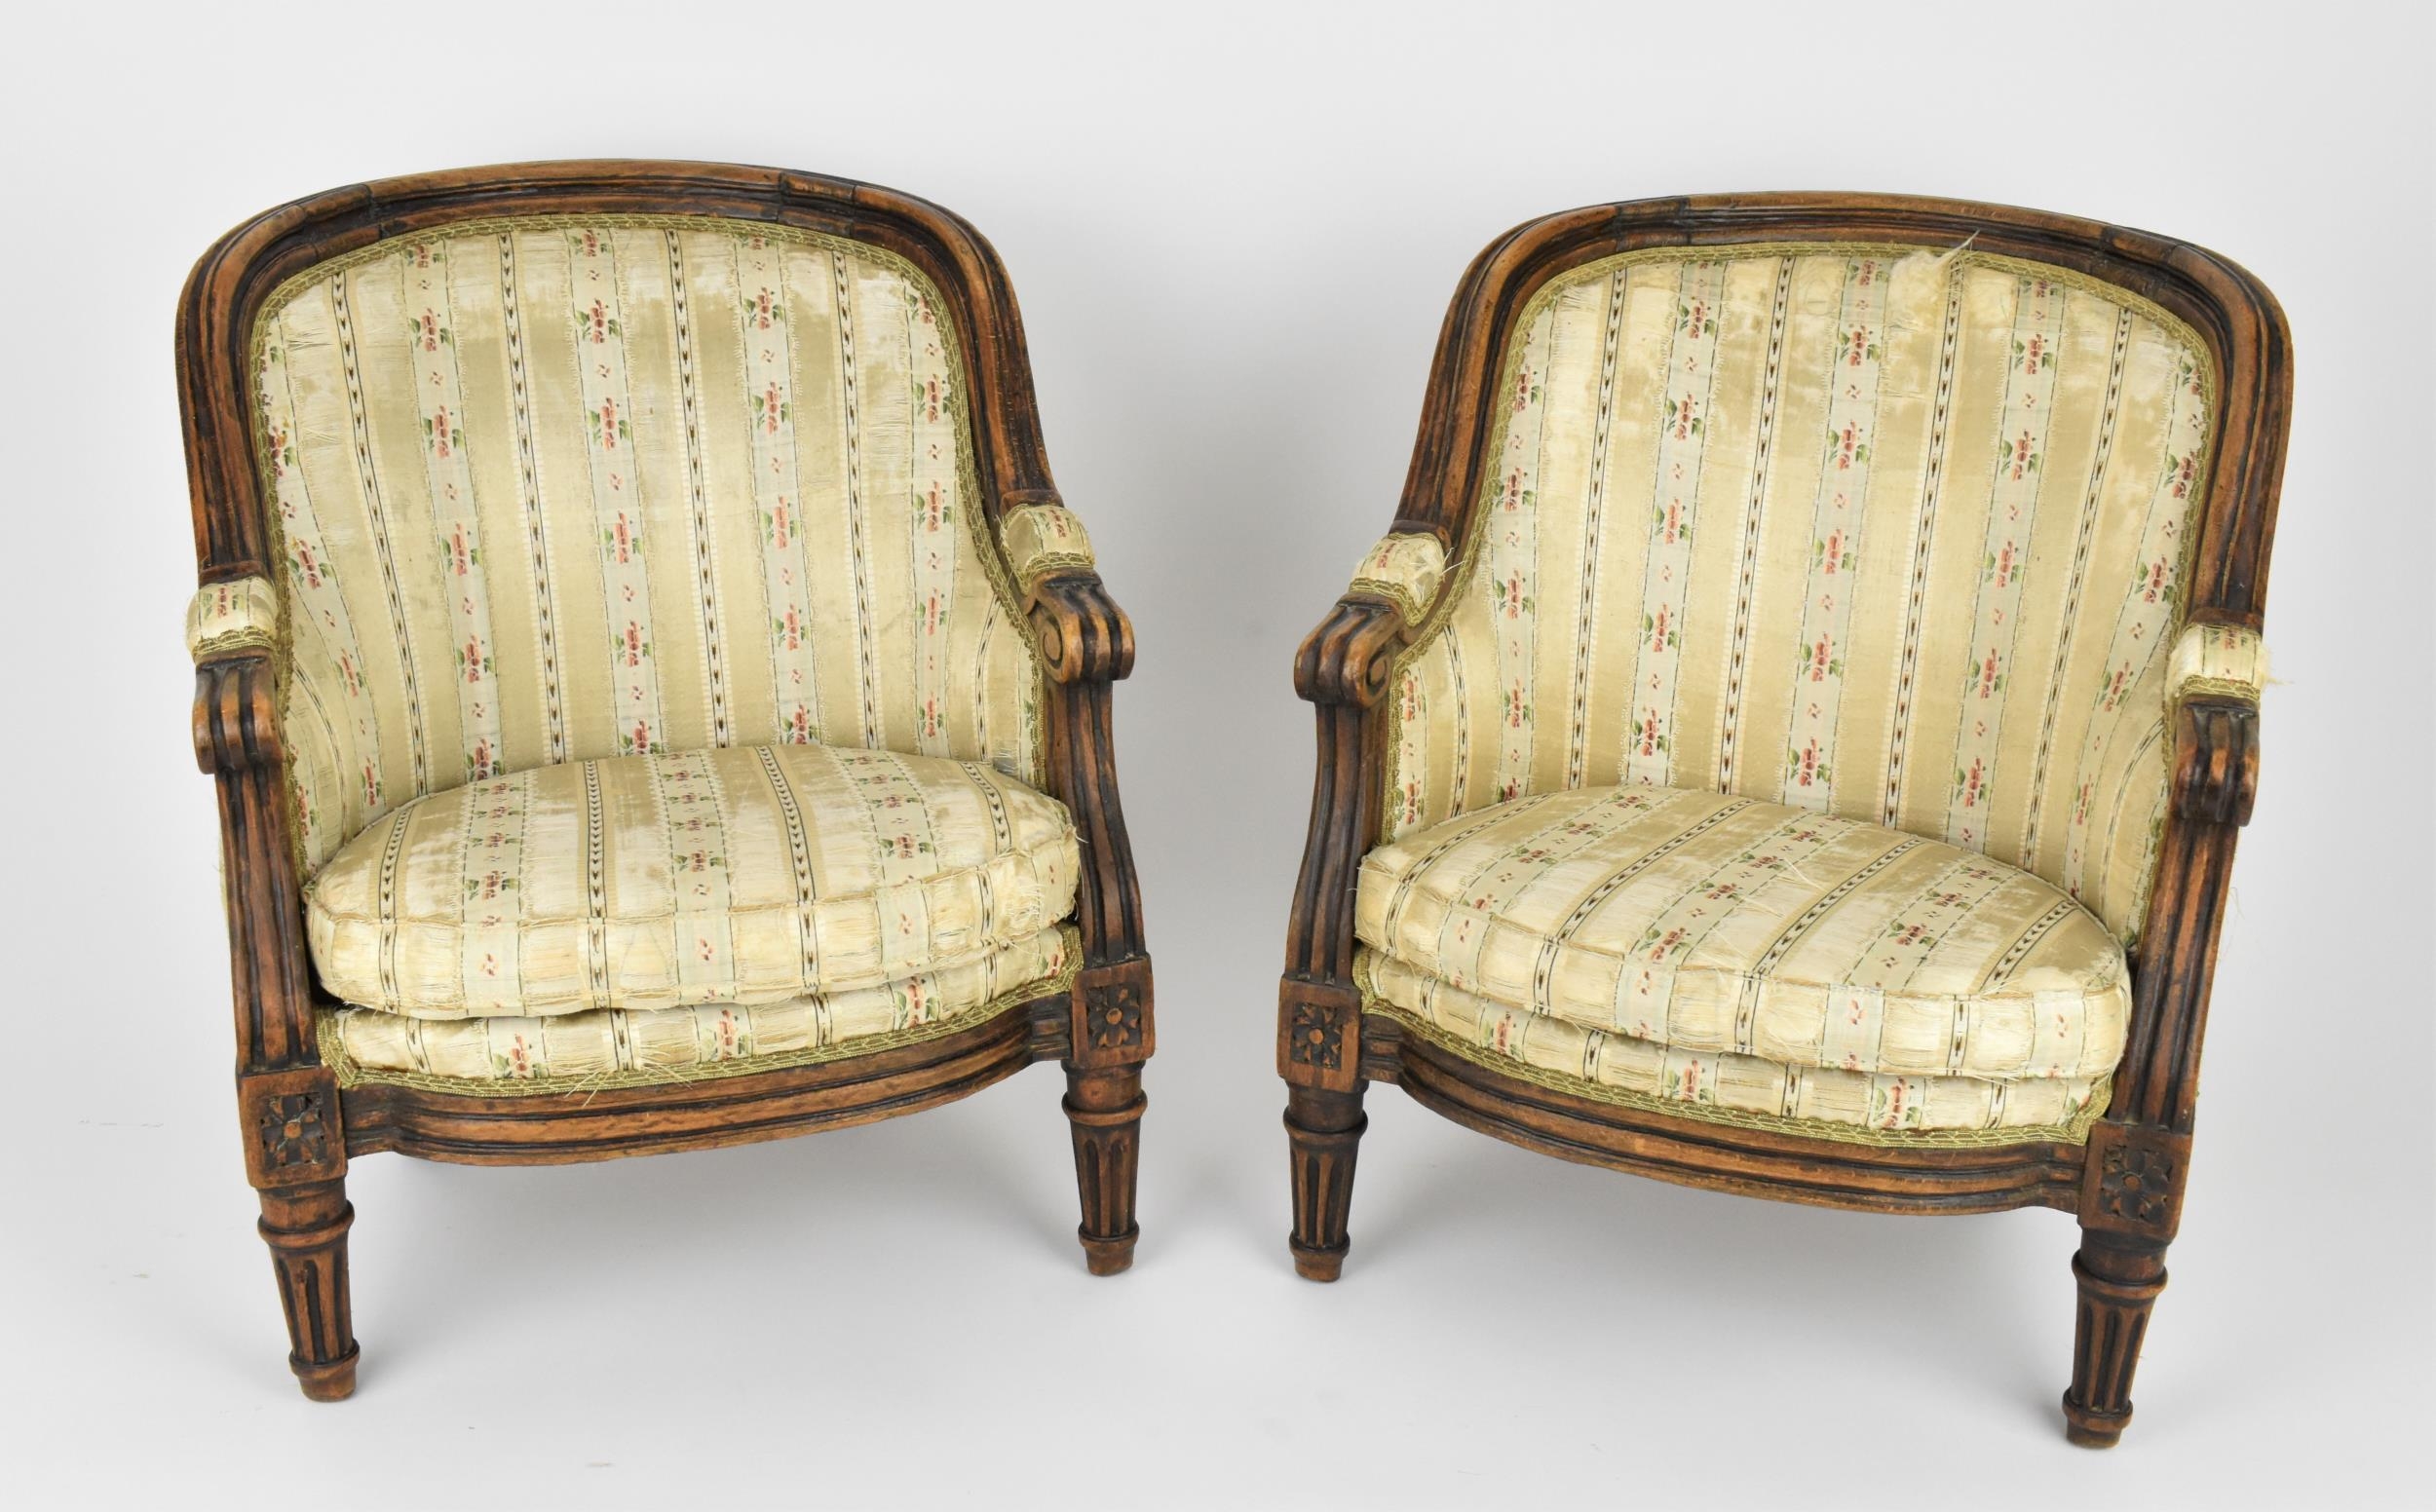 A pair of 18th century French Louis XVI bergère armchairs, circa 1780, with channelled mahogany